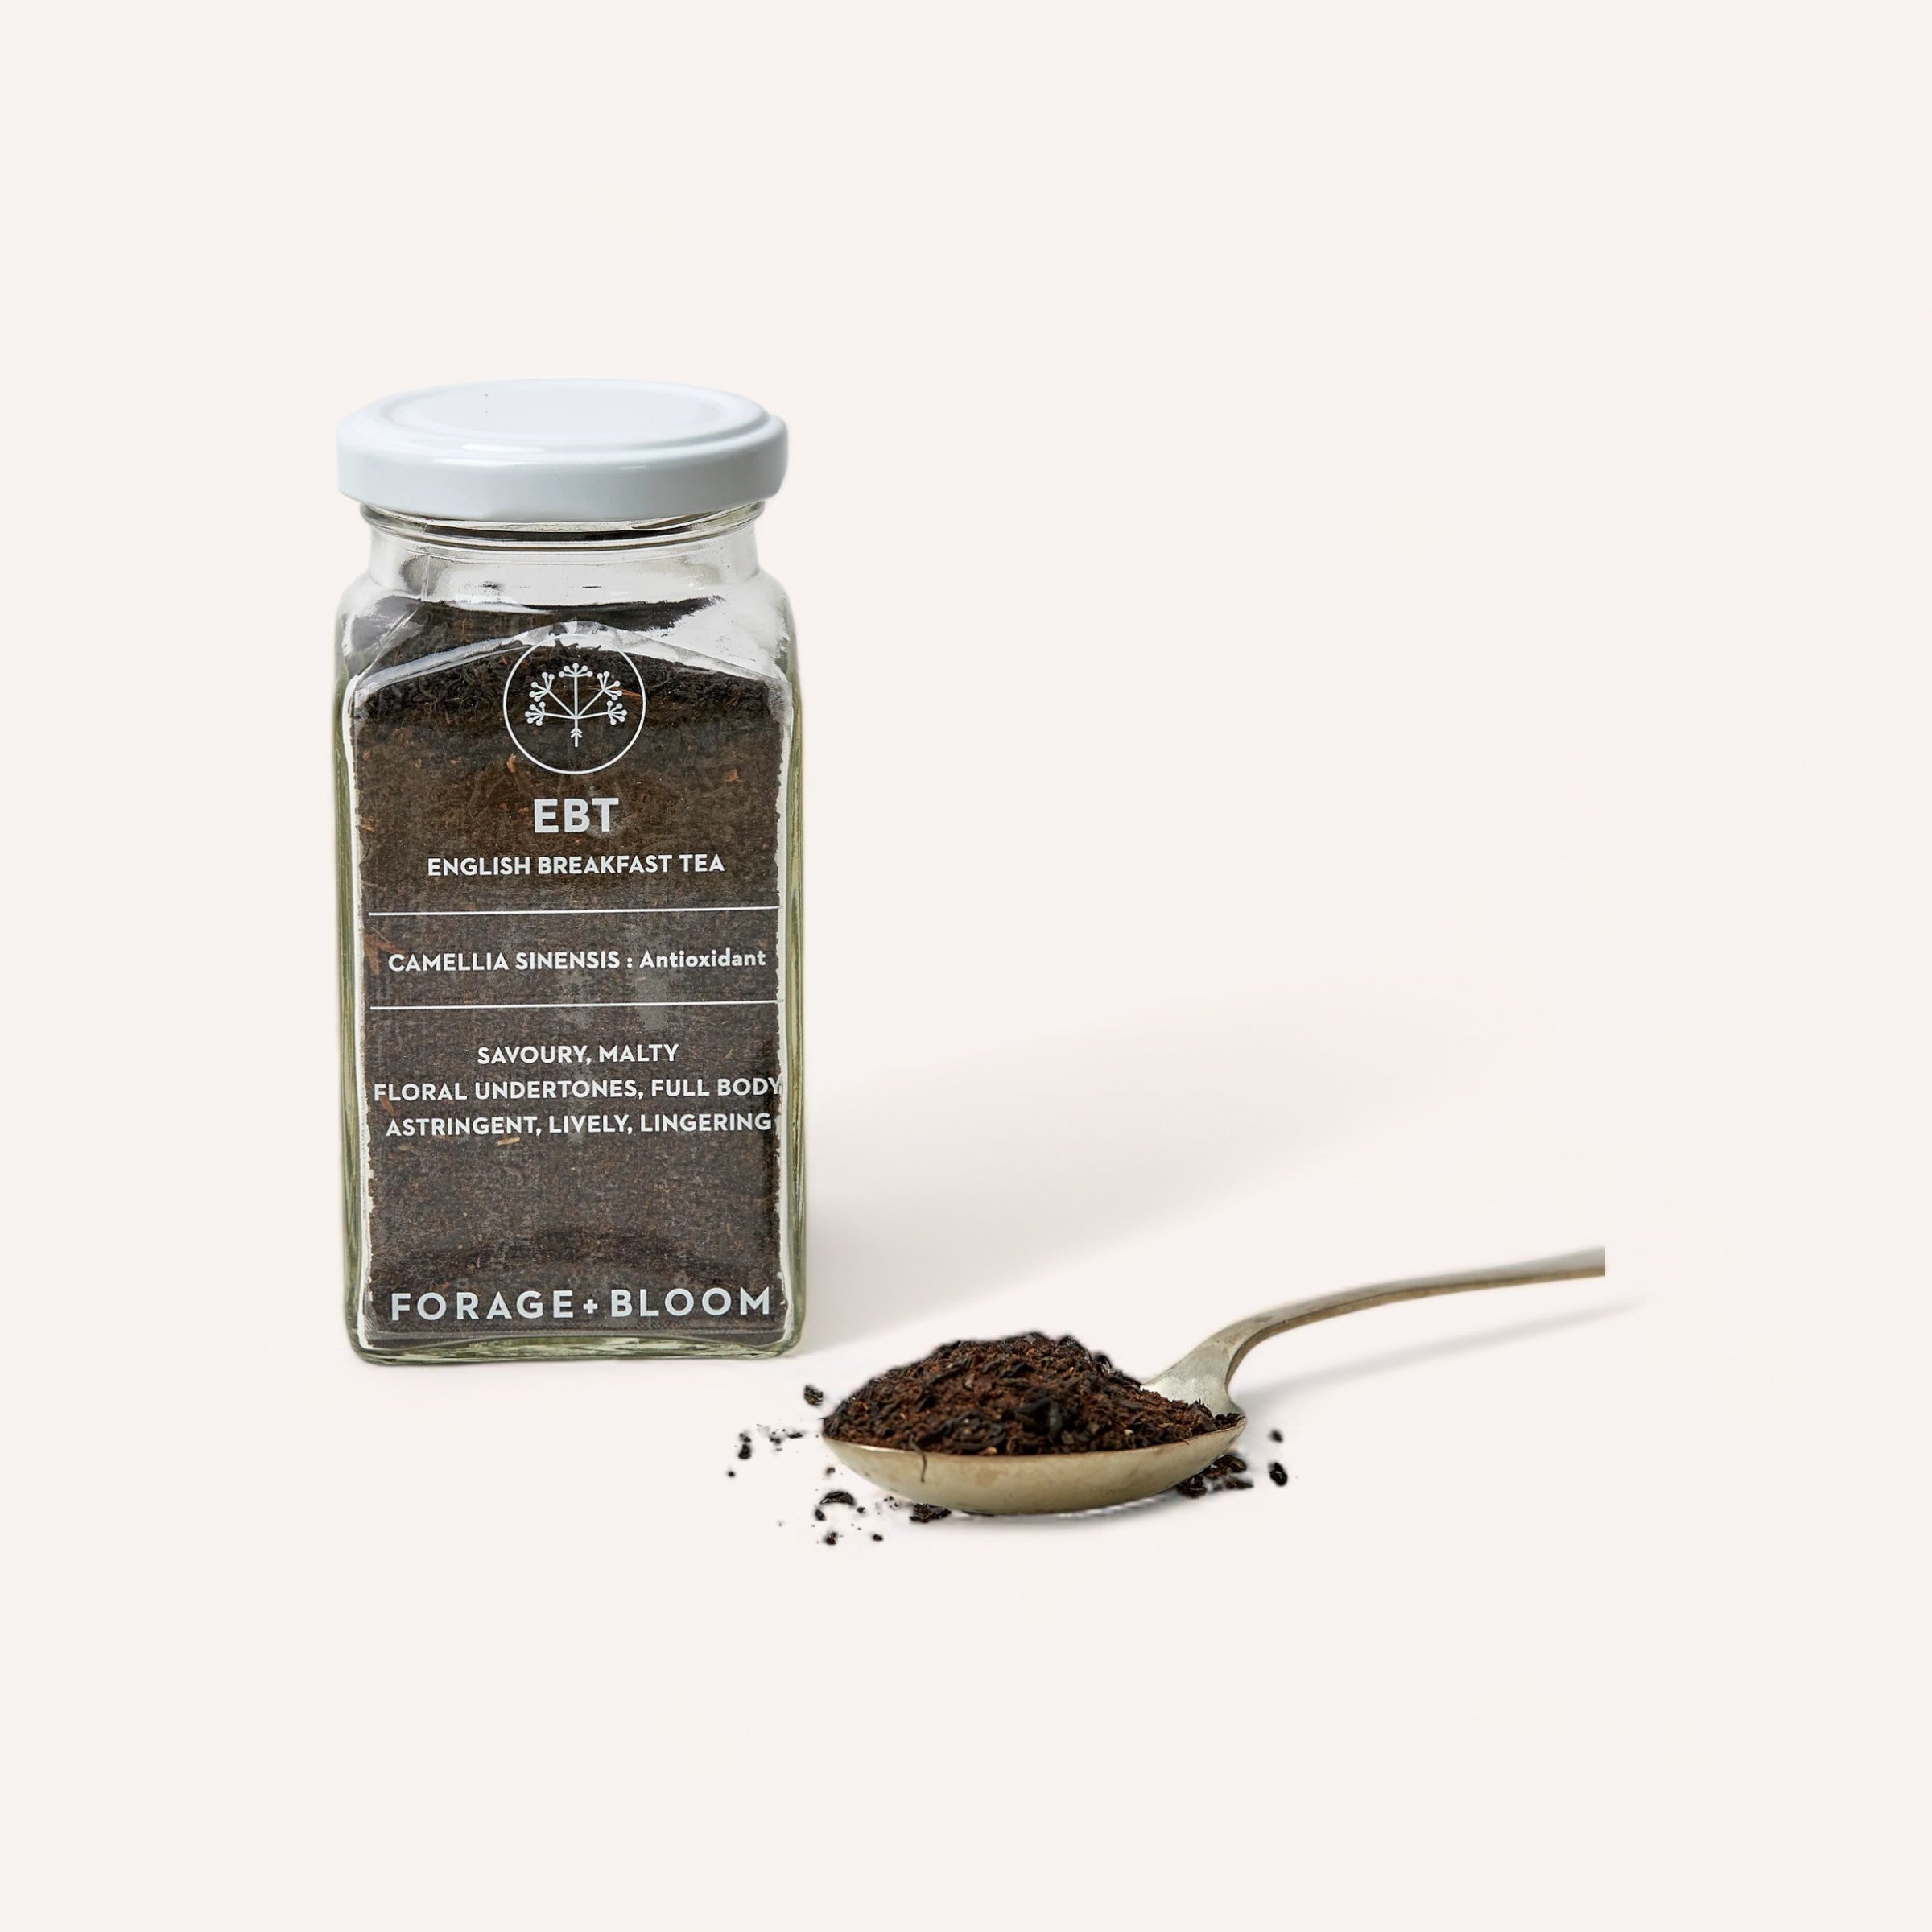 A jar of English Breakfast Tea by Forage + Bloom, a type of antioxidant-rich black tea, alongside a sprinkling of loose leaves on a spoon, embodying a neat and minimalist tea presentation.